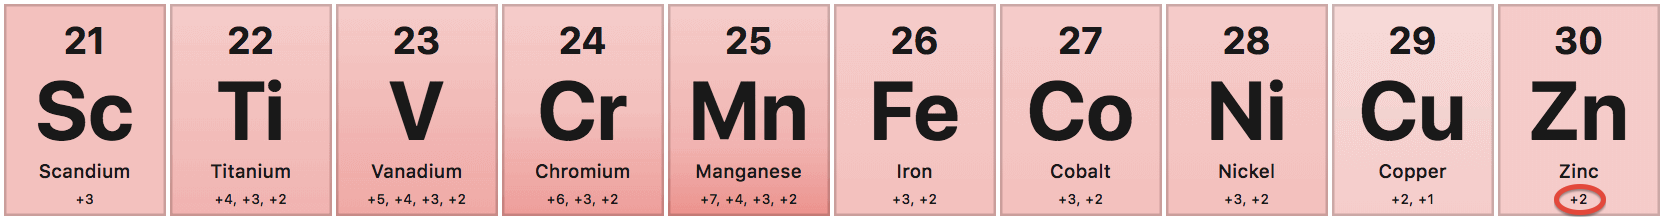 First Row Transition Metals from Periodic Table: Zinc Redox Inactive